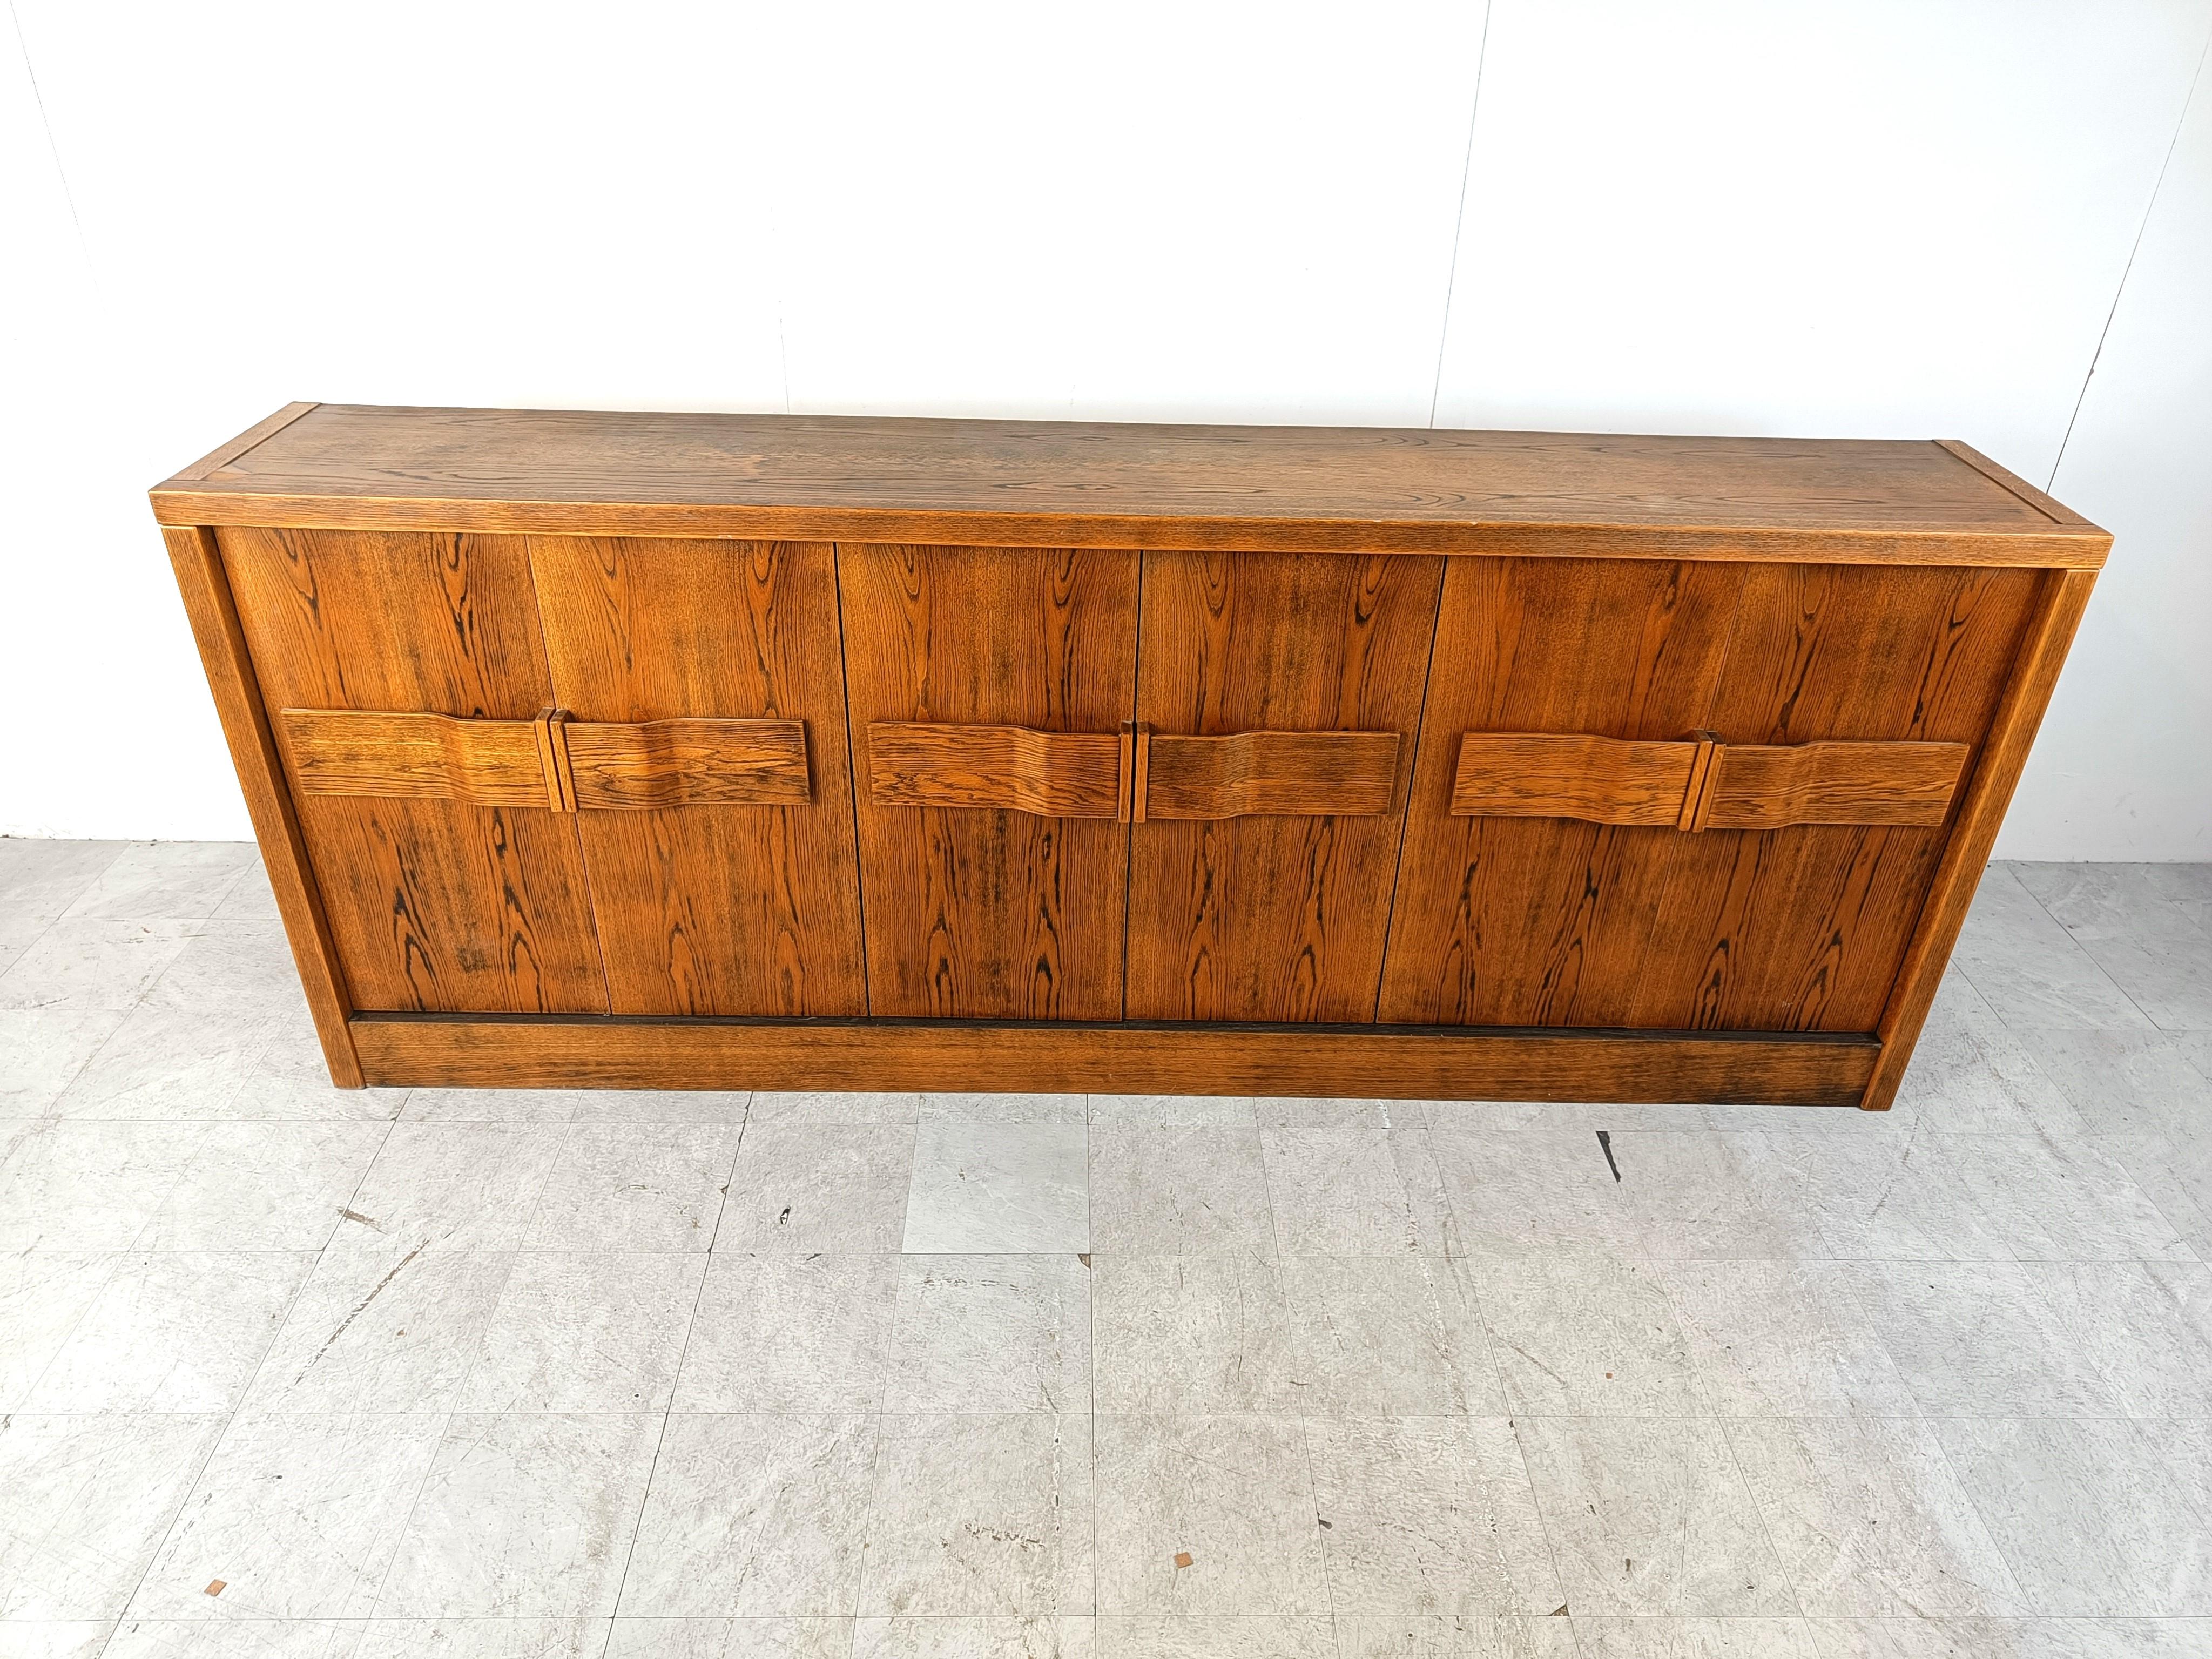 Striking brutalist credenza with large handles.

The credenza has a lot of storage space and features 6 doors.

Good condition, with normal age related wear.

1970s - Belgium

Dimensions:
Height: 110cm
Width: 285cm
Depth: 50cm

Ref.: 90304